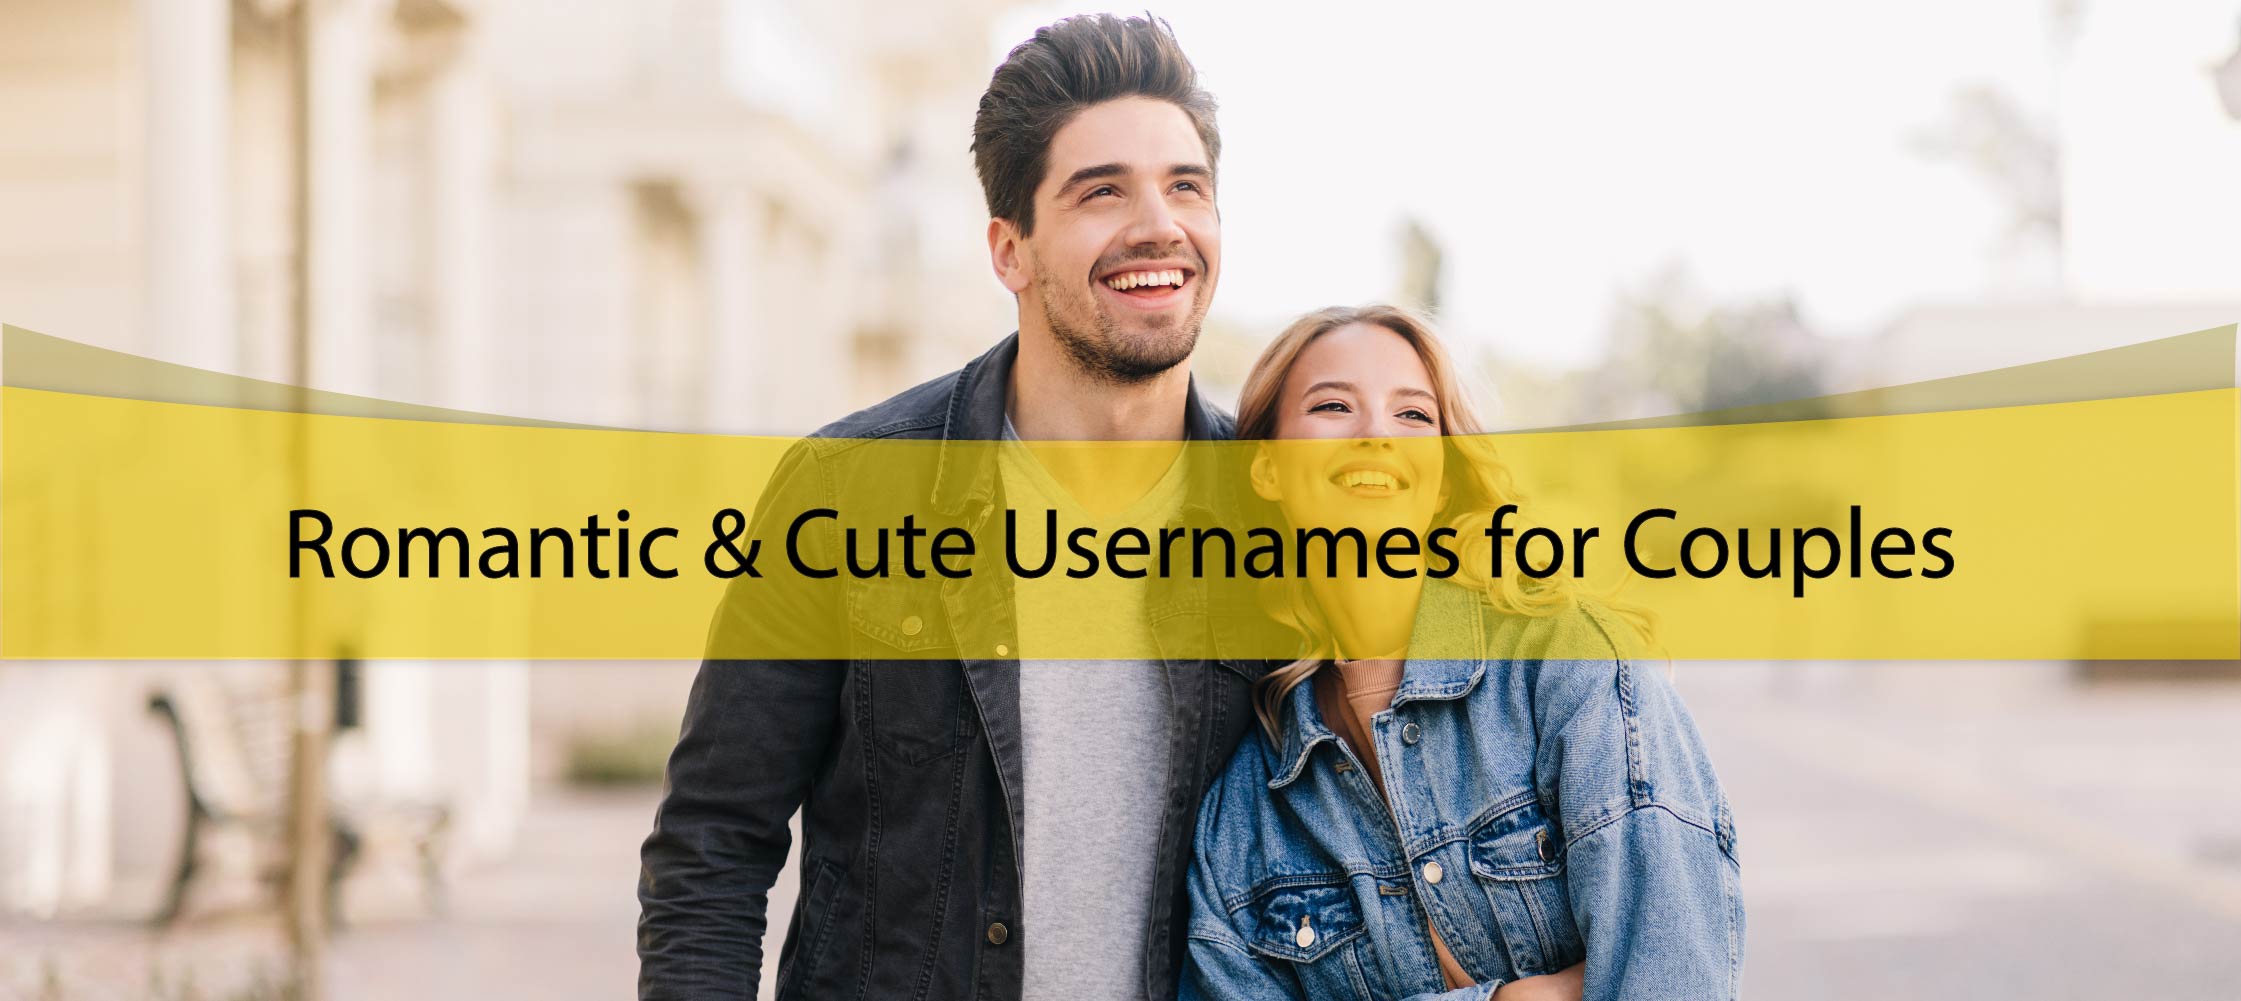 Romantic & Cute Usernames for Couples